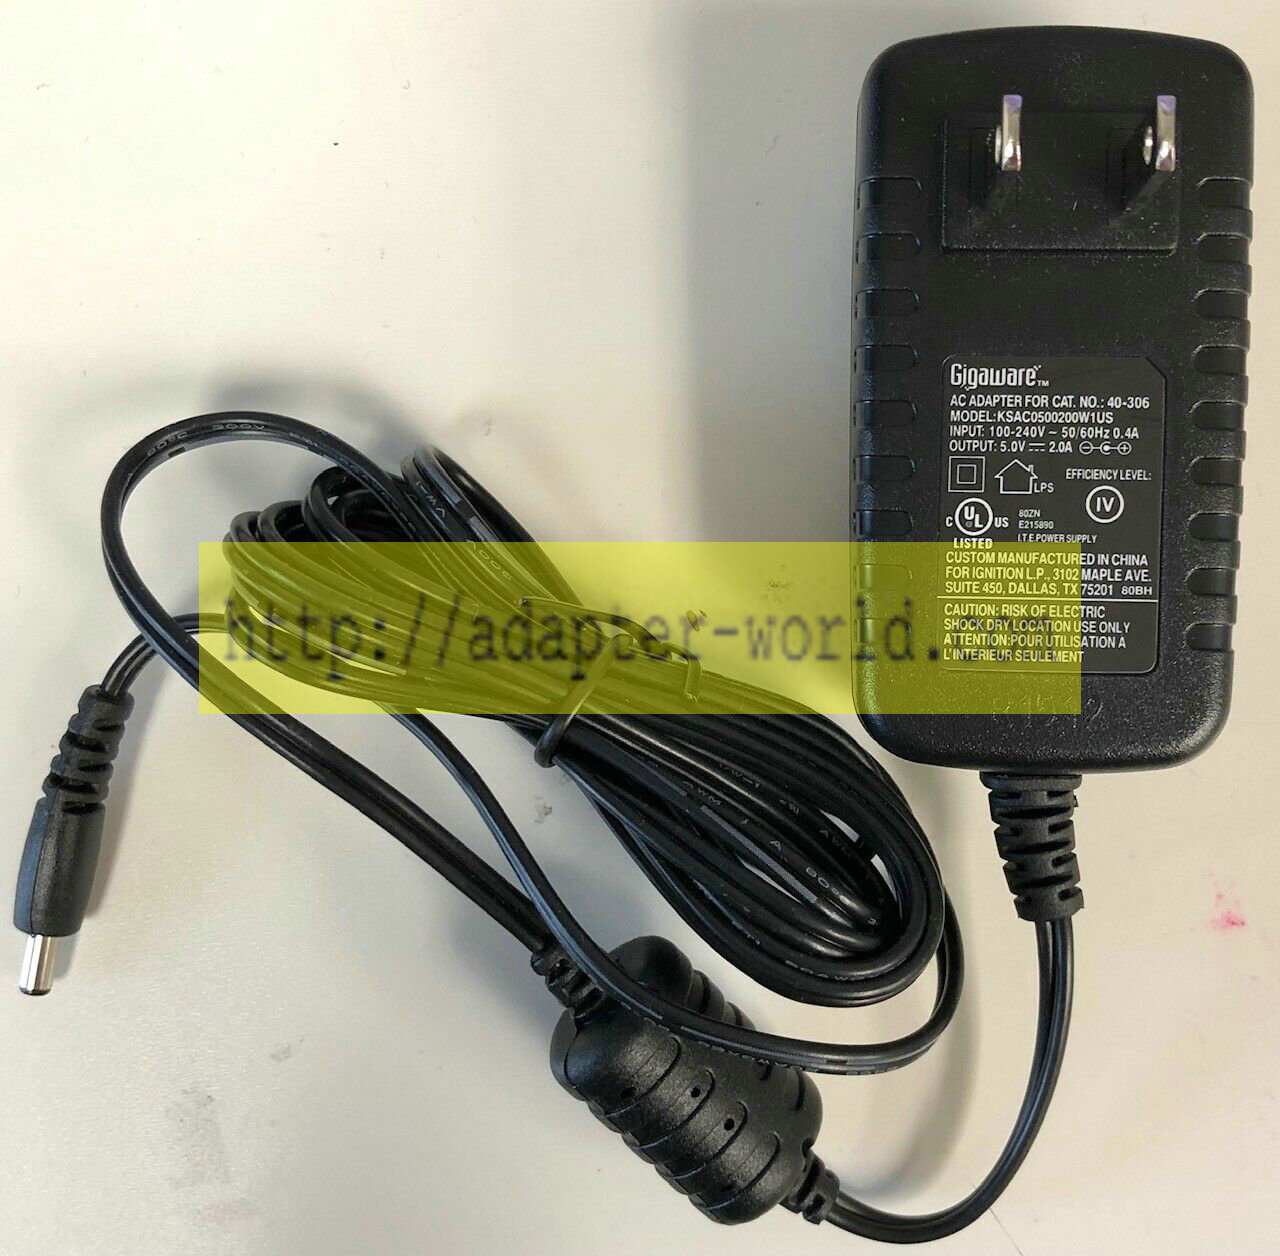 *Brand NEW*Gigaware KSAC0500200W1US 40-306 5.0V 2.0A AC DC Adapter POWER SUPPLY